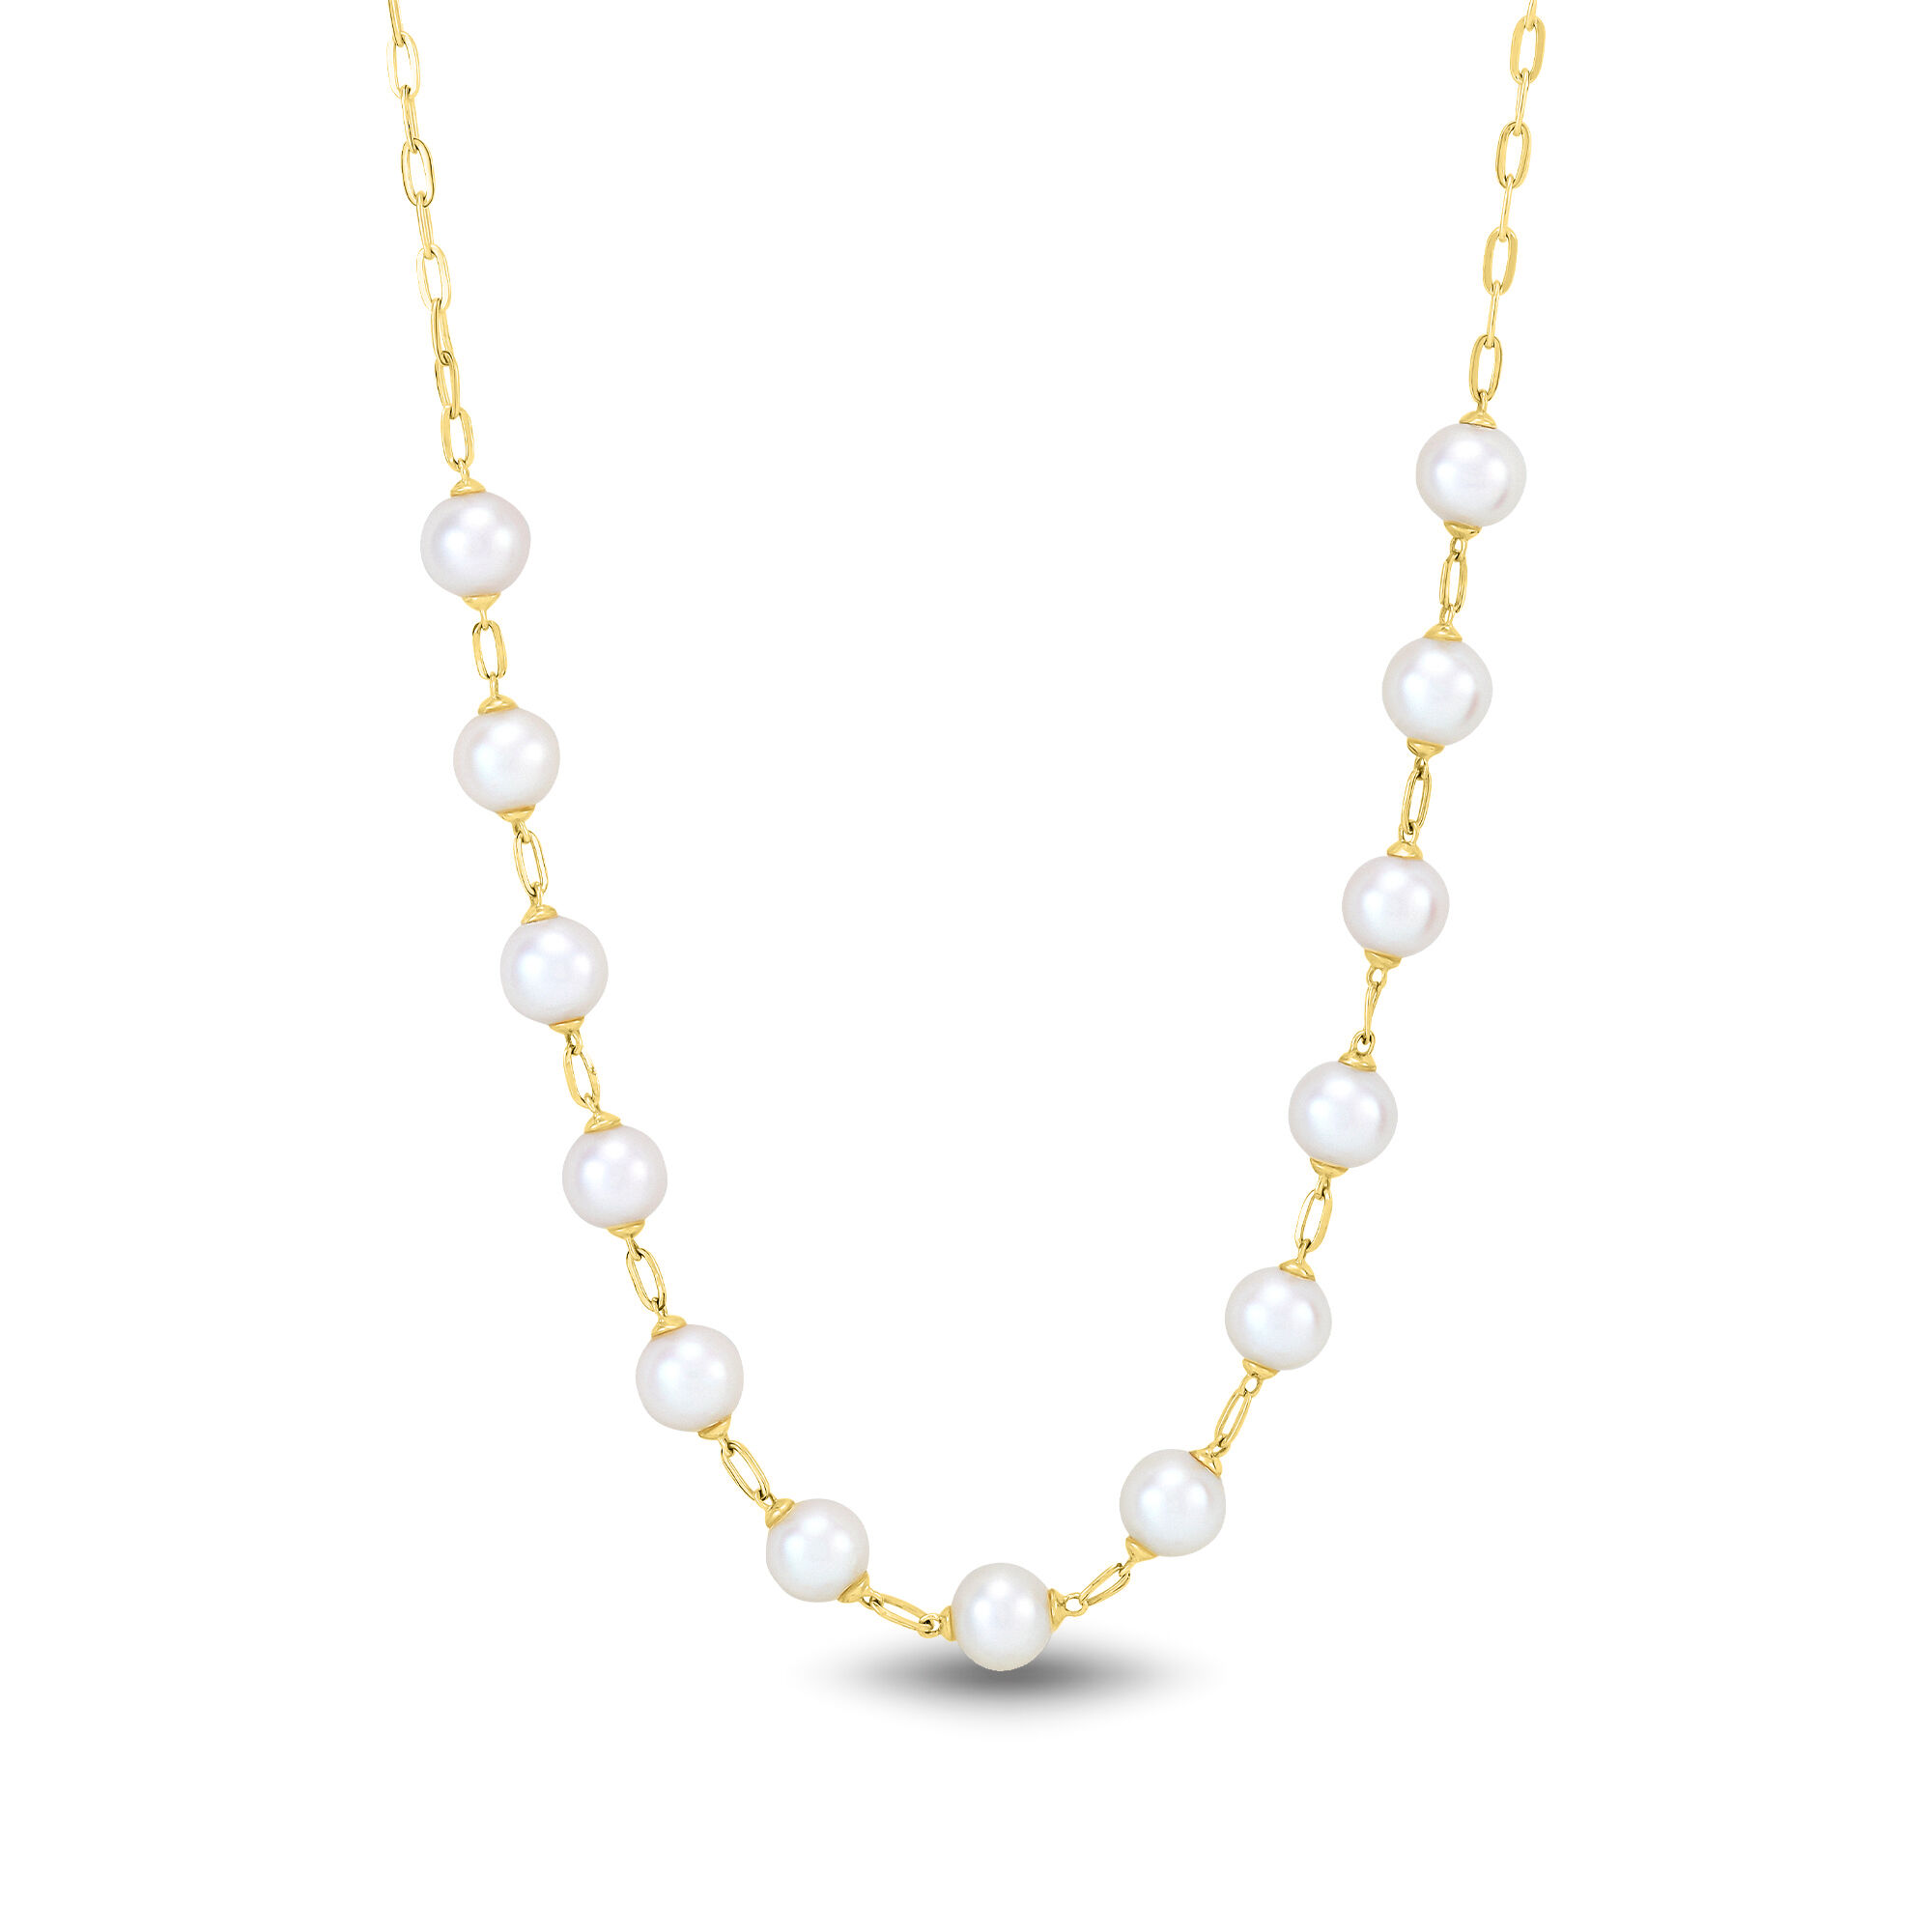 14k Gold Pearl & Paperclip Station Necklace - J.H. Breakell and Co.